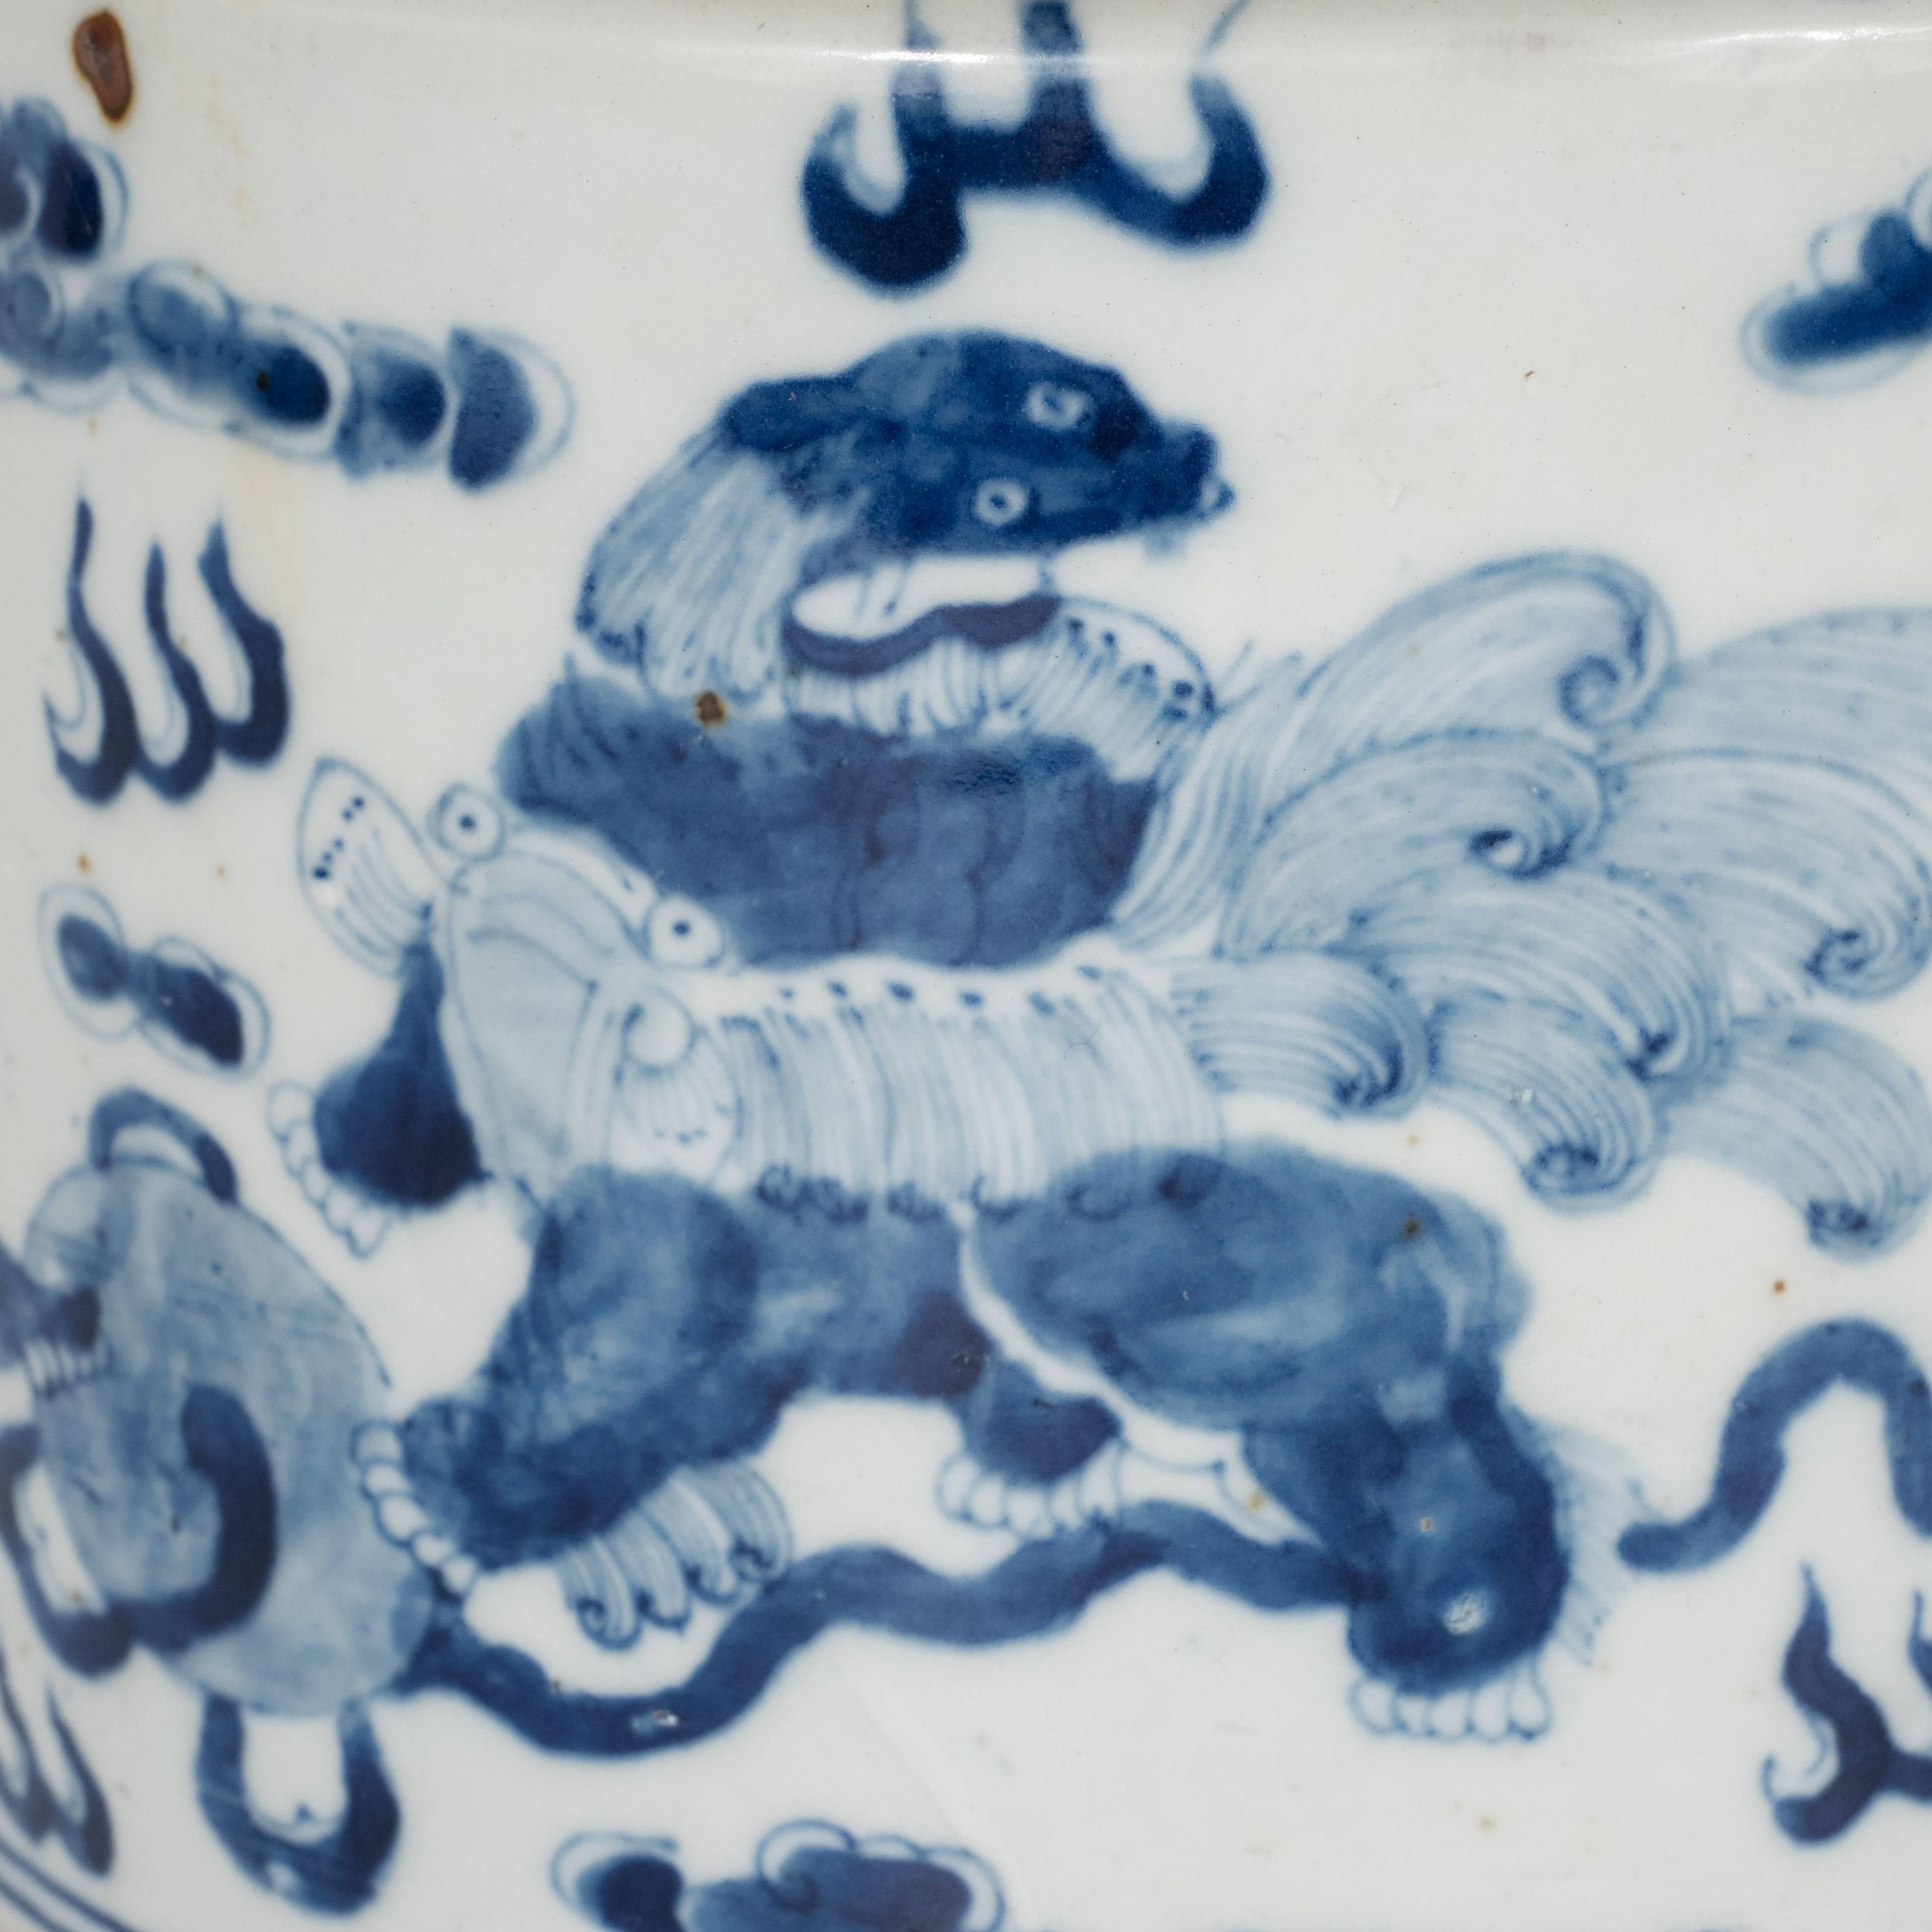 Exquisite Chinese Delft Tea Pot 19th Century with Temple Guardian Lions Motif 3